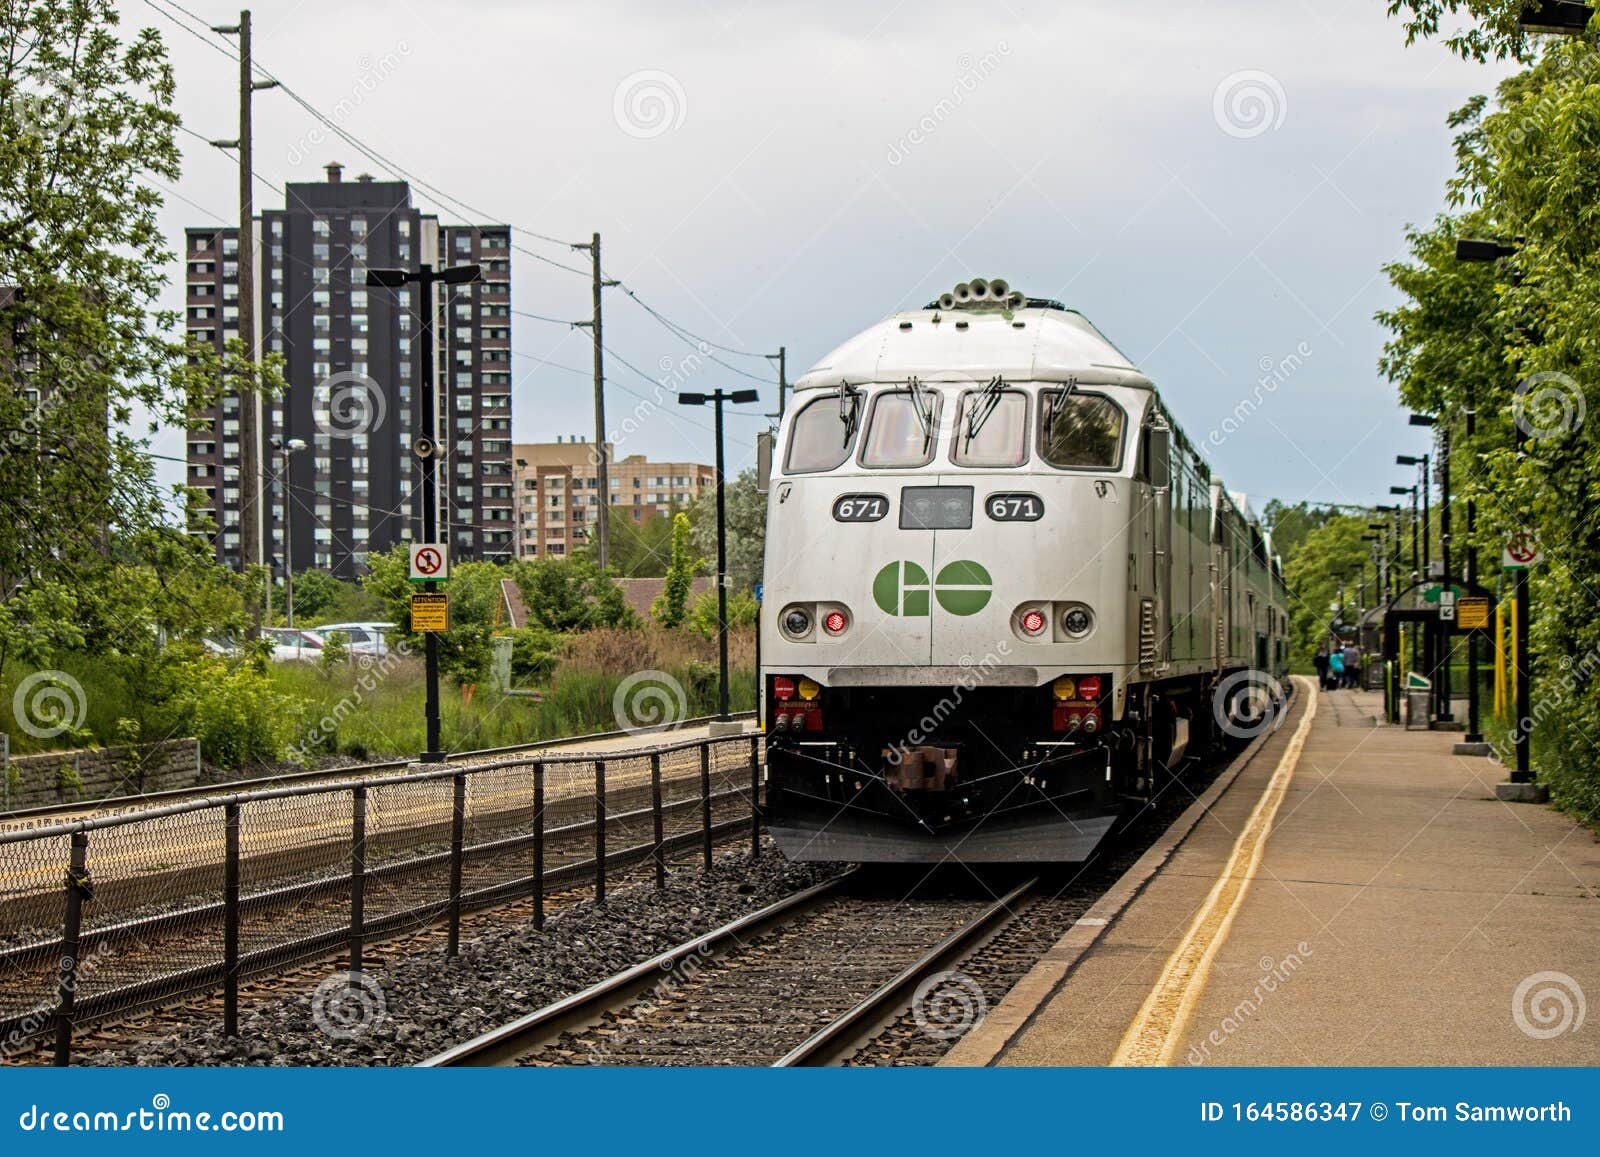 https://thumbs.dreamstime.com/z/go-commuter-train-stopped-long-branch-station-border-mississauga-toronto-ontario-canada-stop-164586347.jpg